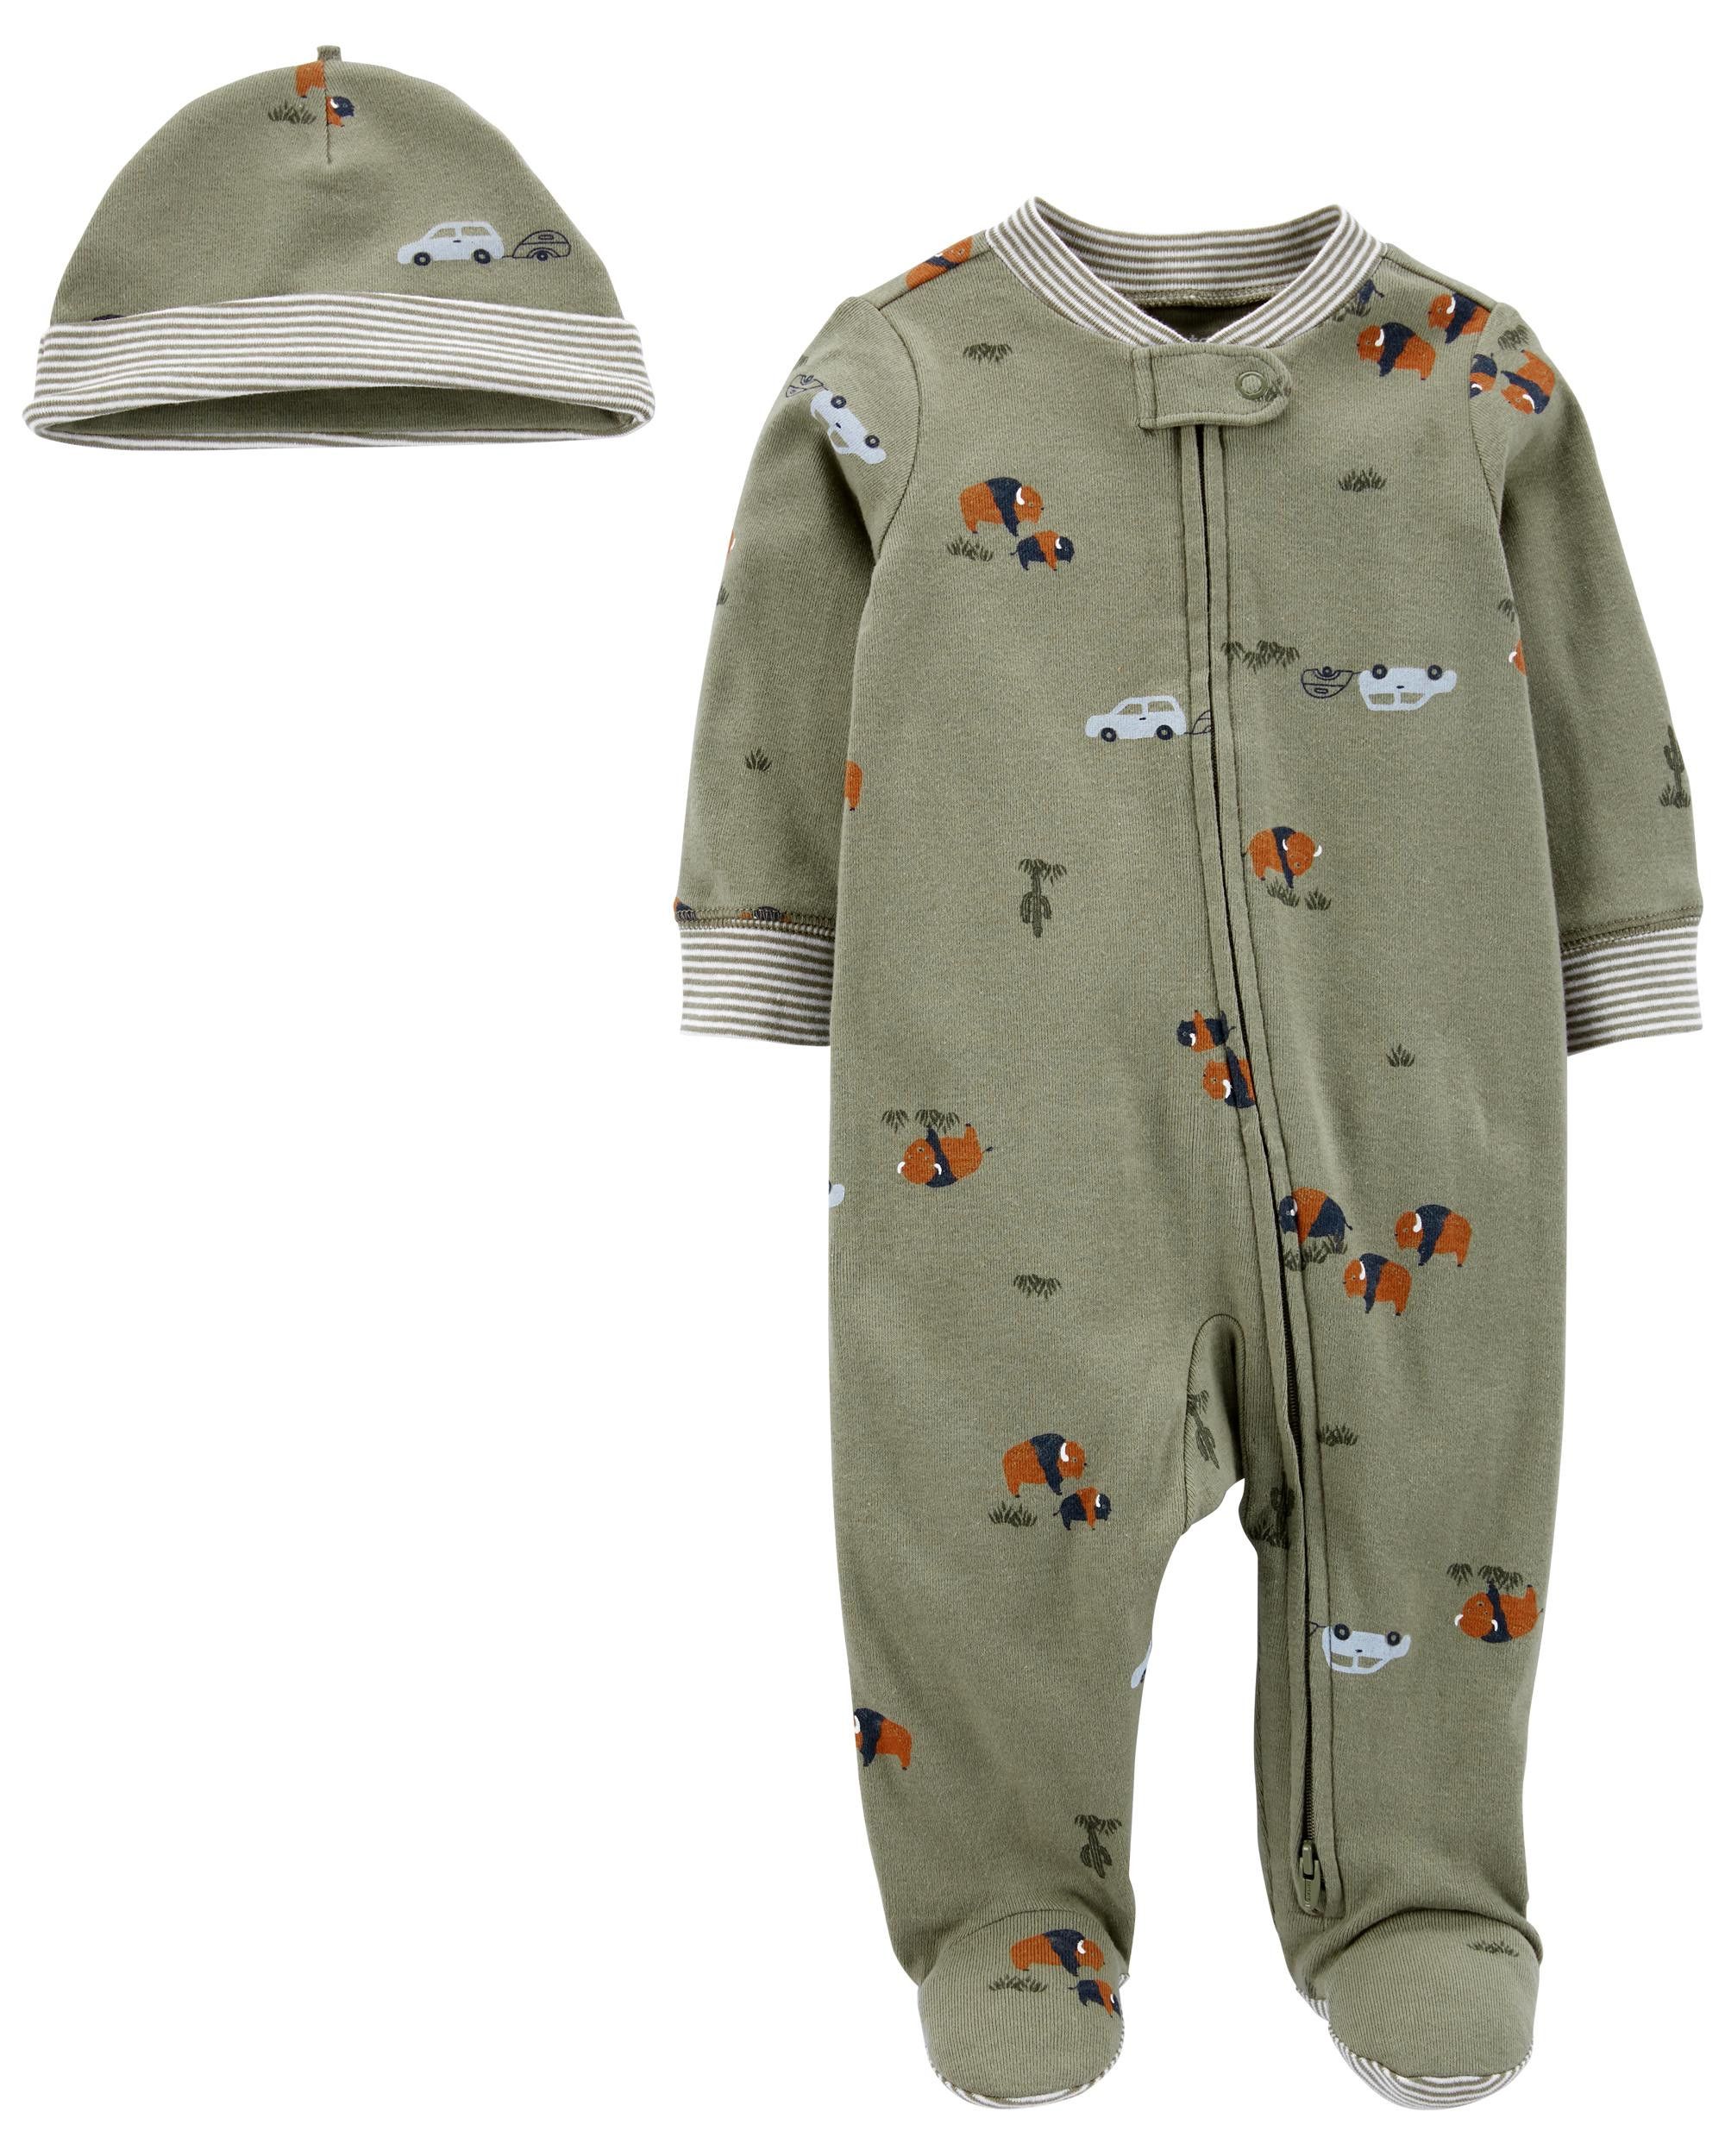 Baby Boy Outfits, Baby Boy Clothes, Toddler Boy Outfits | Carter's